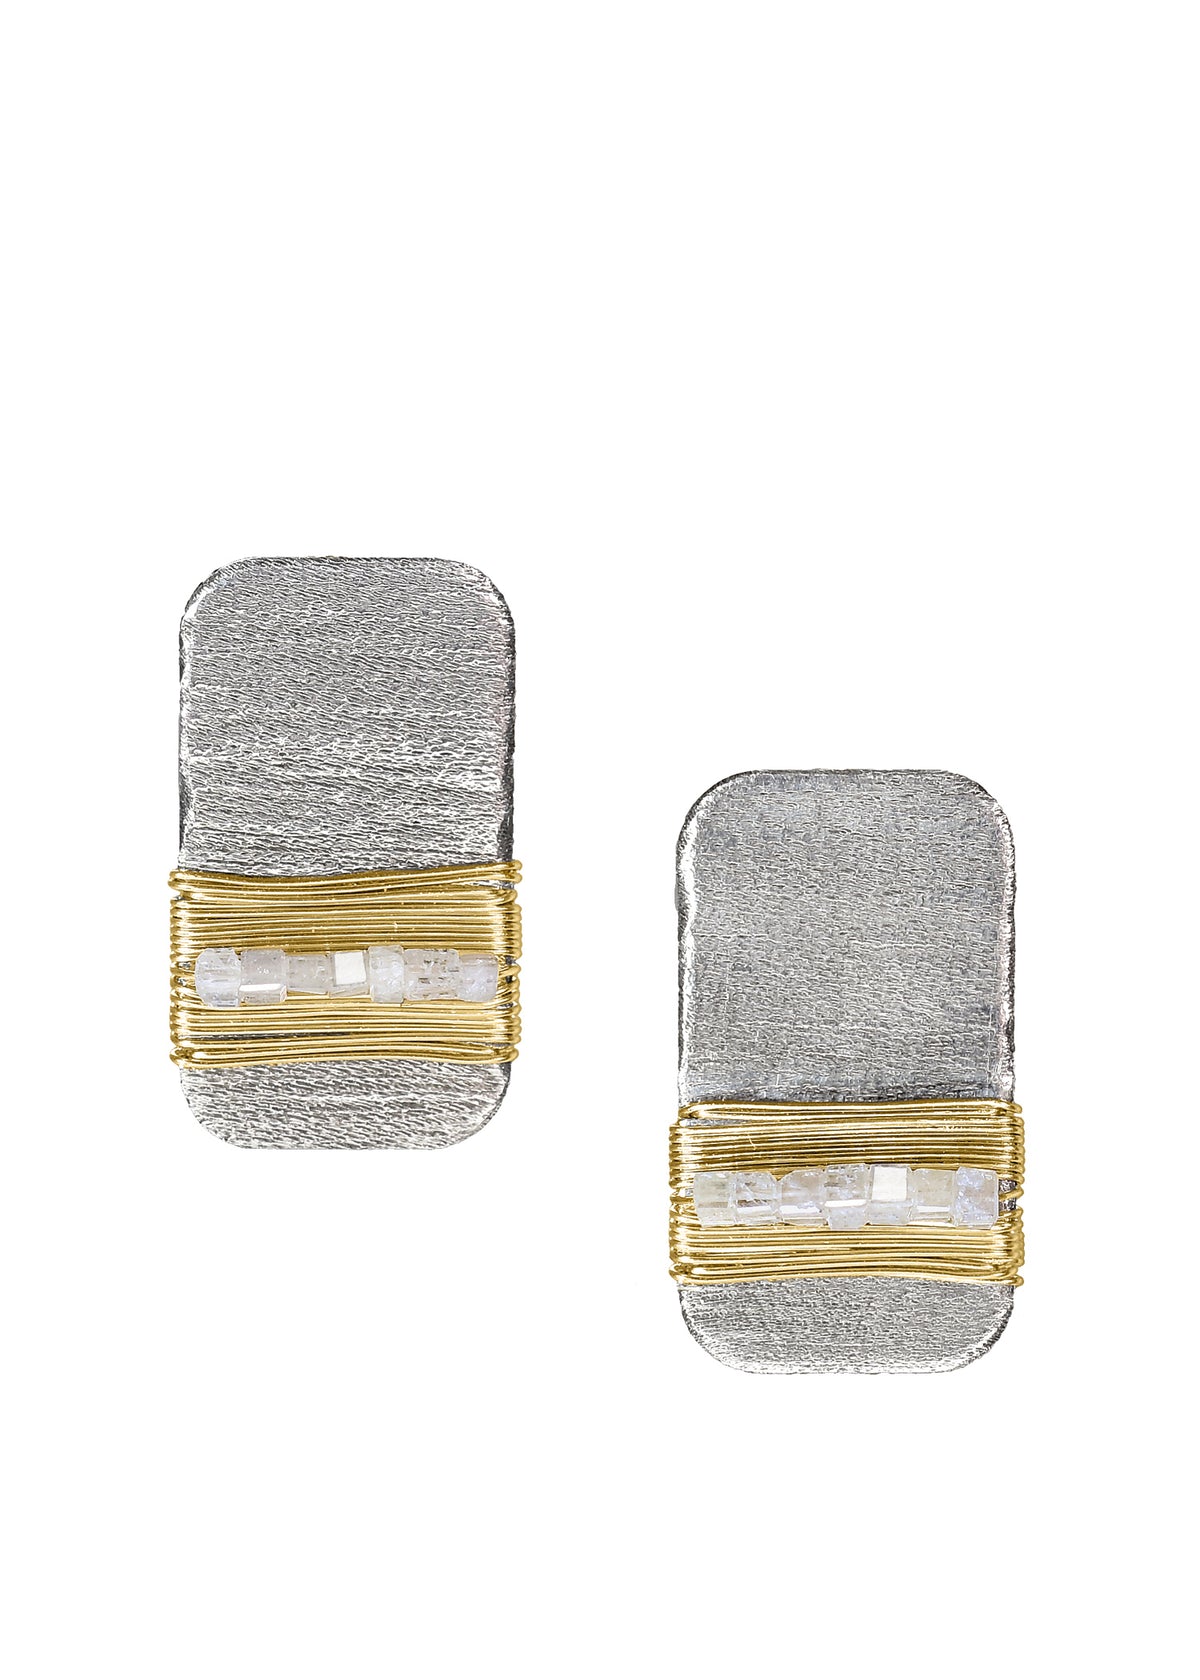 Diamond 14k gold Sterling silver Mixed metal Earrings measure 11/16&quot; in length and 3/8&quot; in width Handmade in our Los Angeles studio